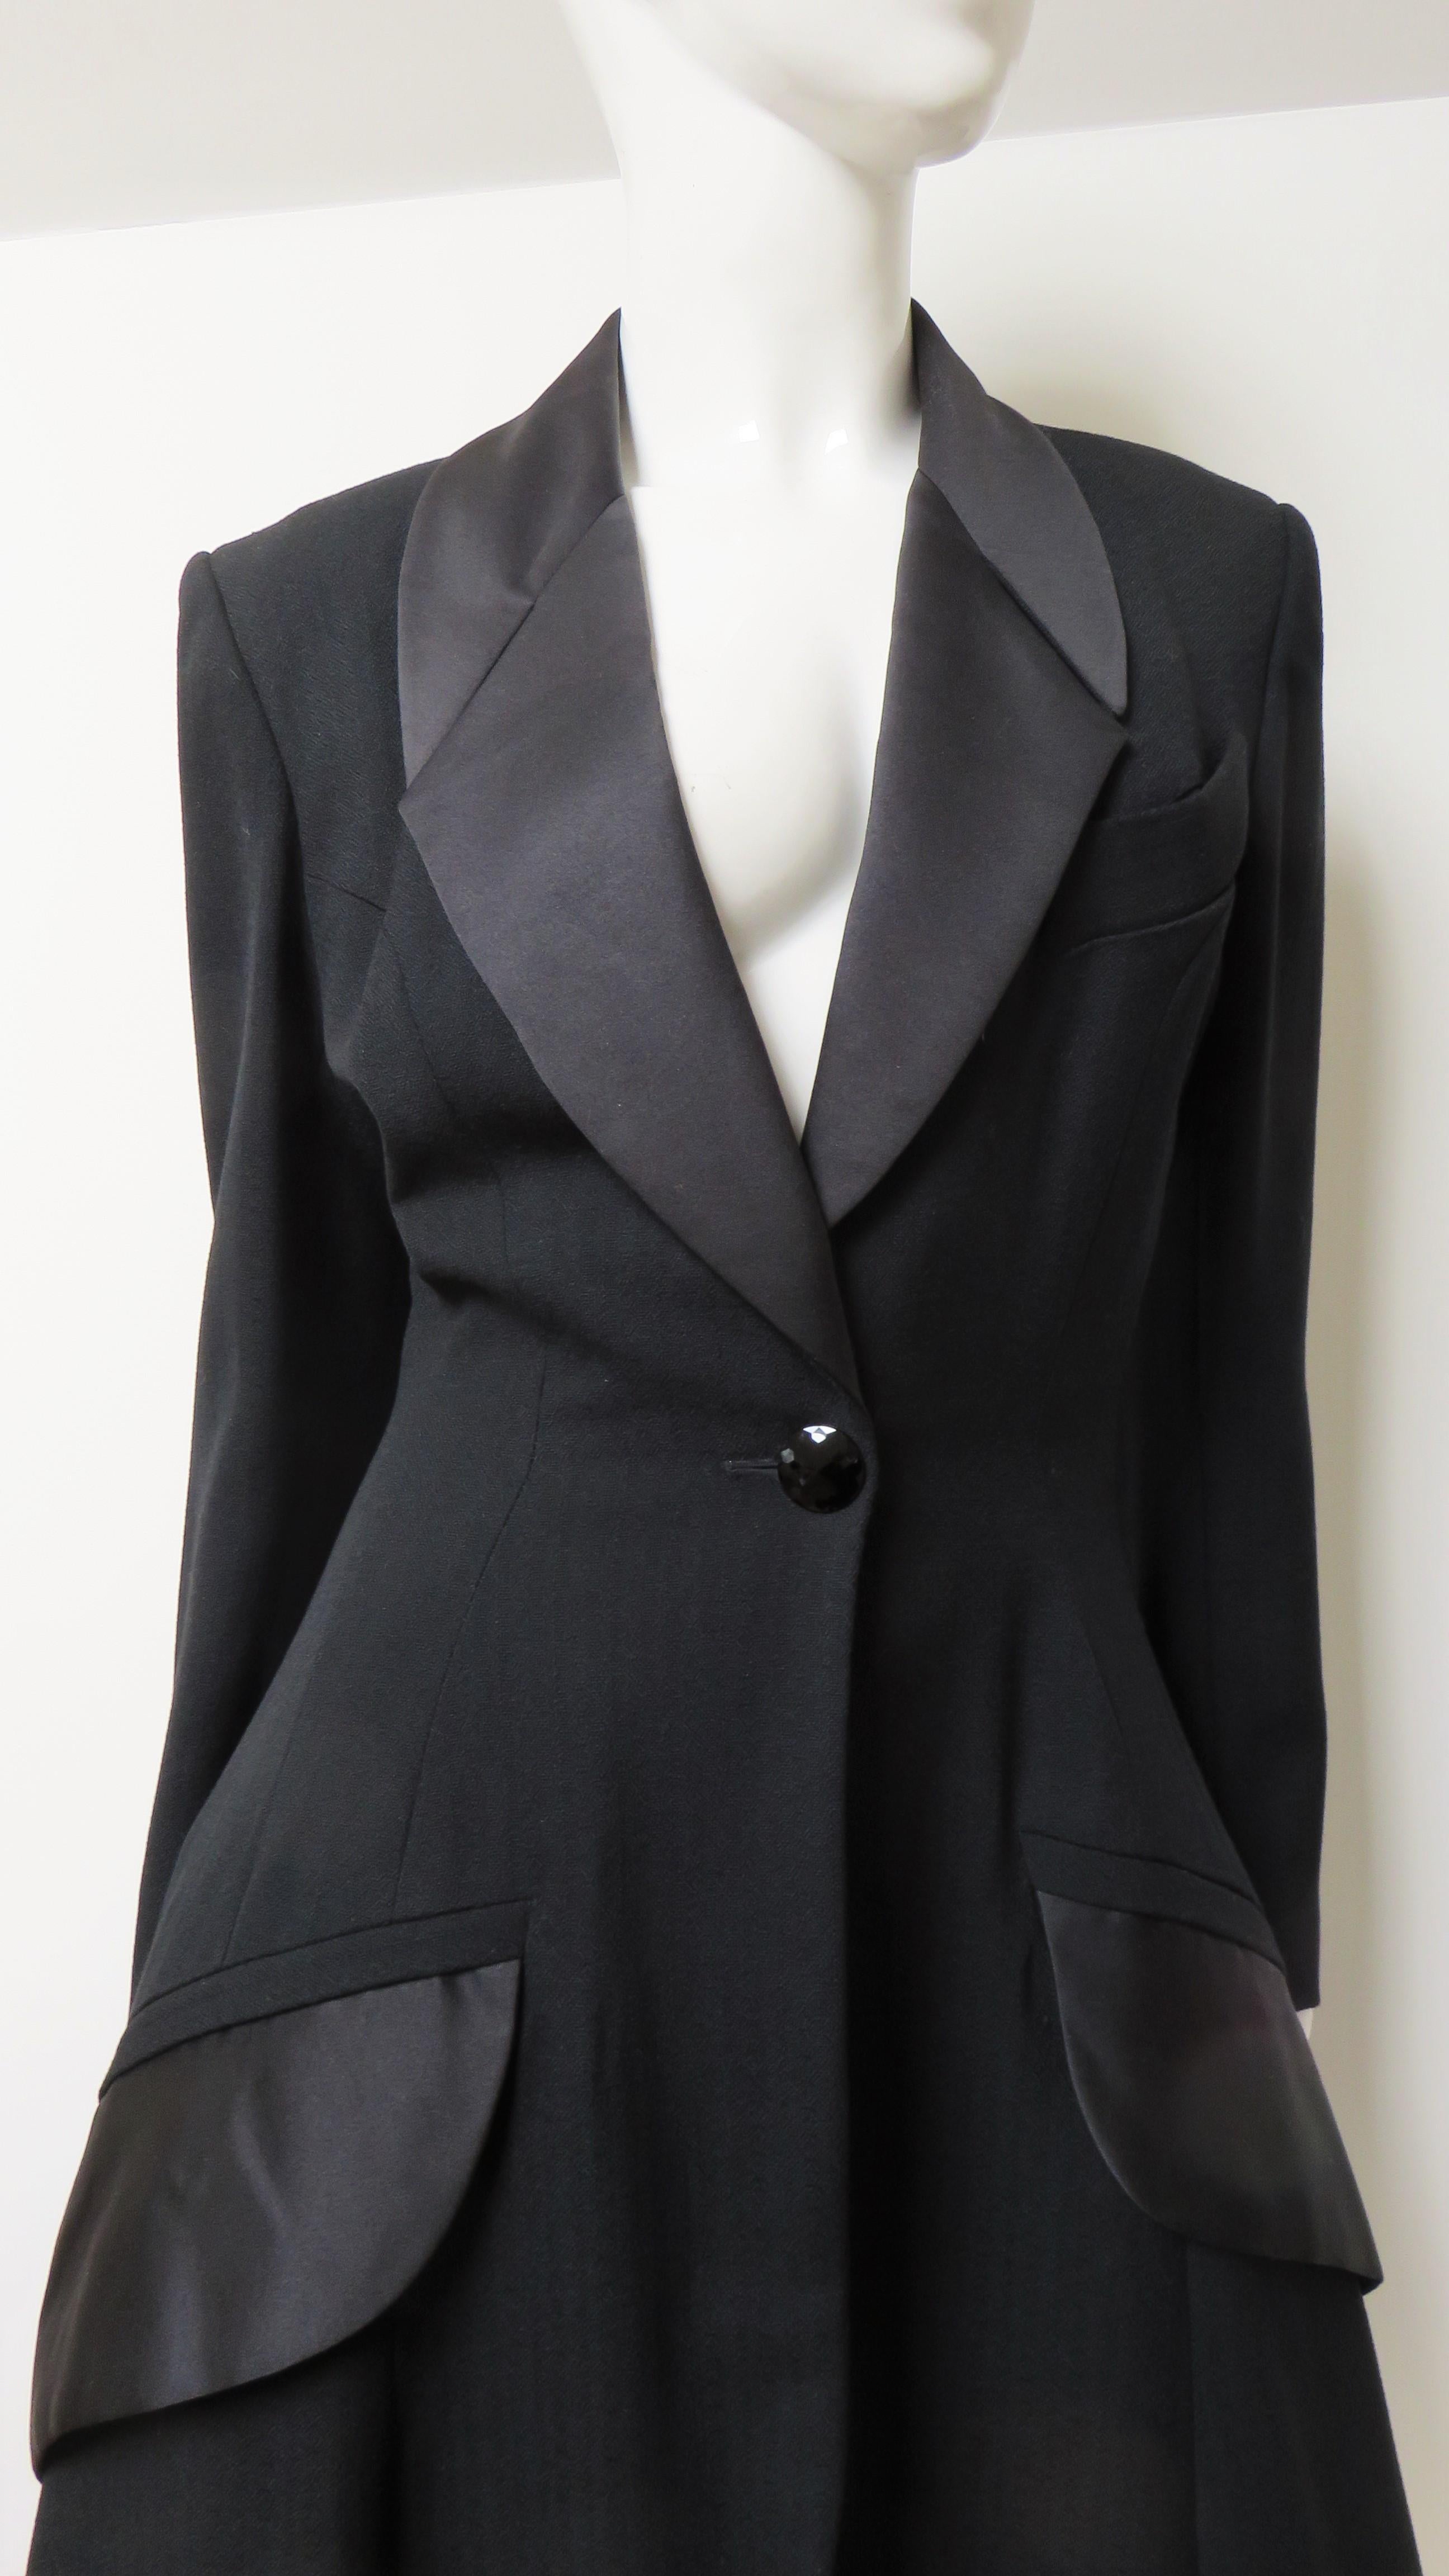 Byron Lars Legendary New 1990s Tuxedo Pants and Coat In Excellent Condition For Sale In Water Mill, NY